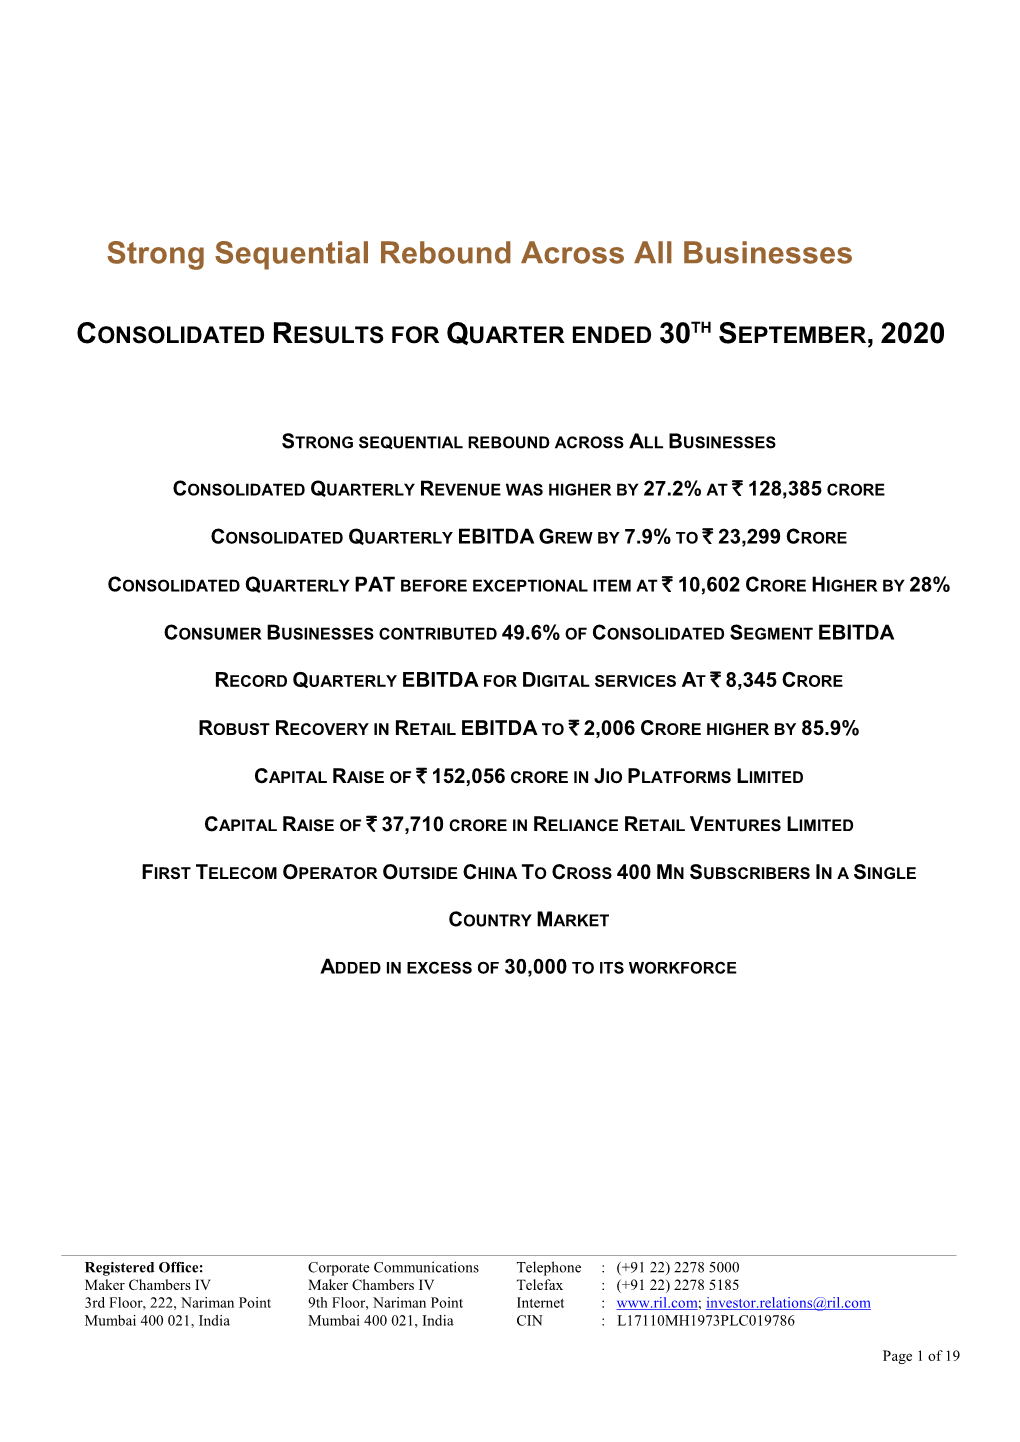 Strong Sequential Rebound Across All Businesses